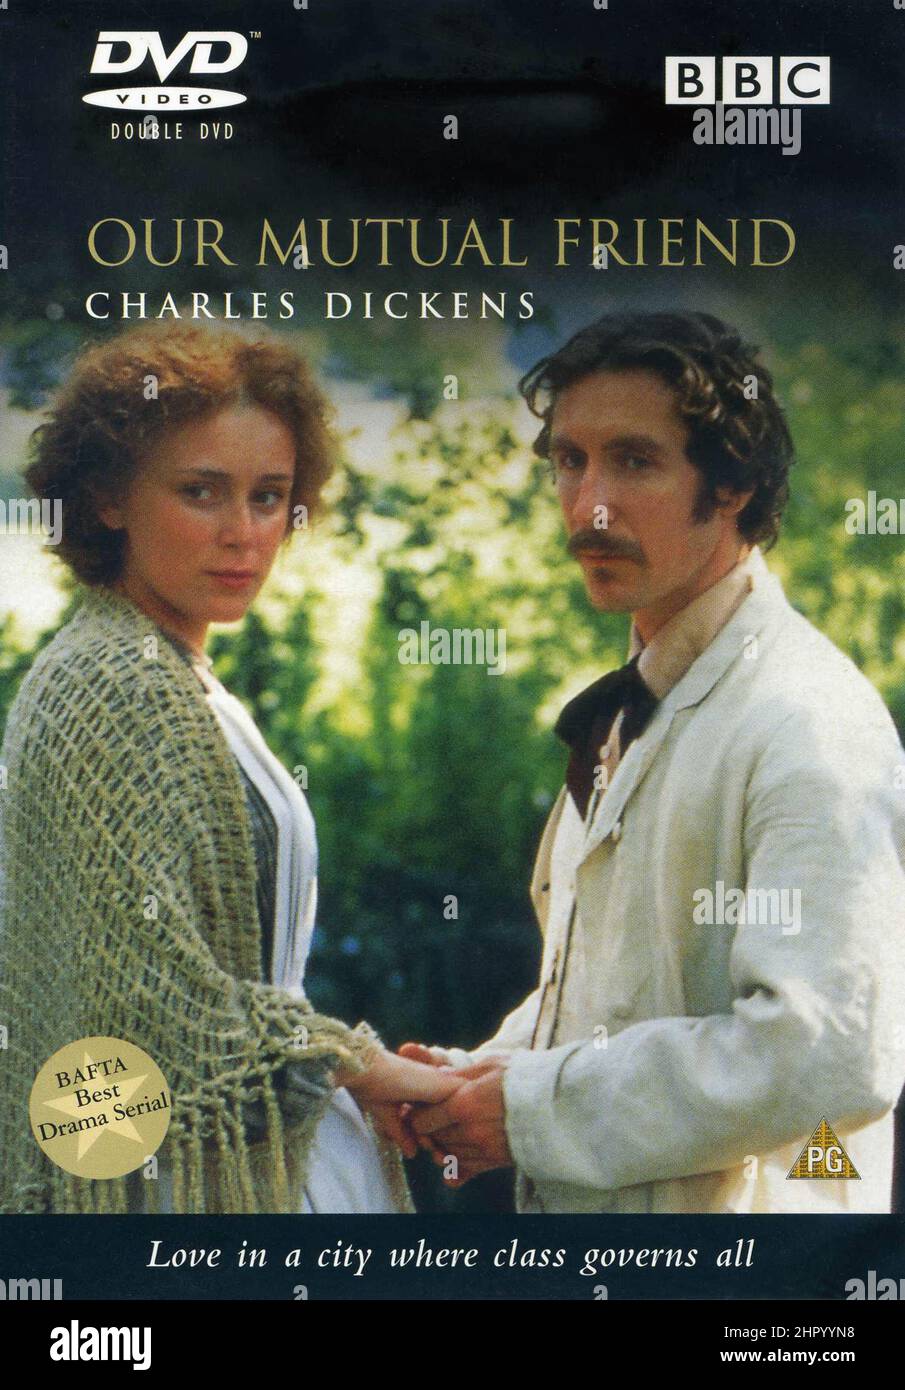 DVD Cover. 'Our Mutual Friend'. Charles Dickens. Stock Photo